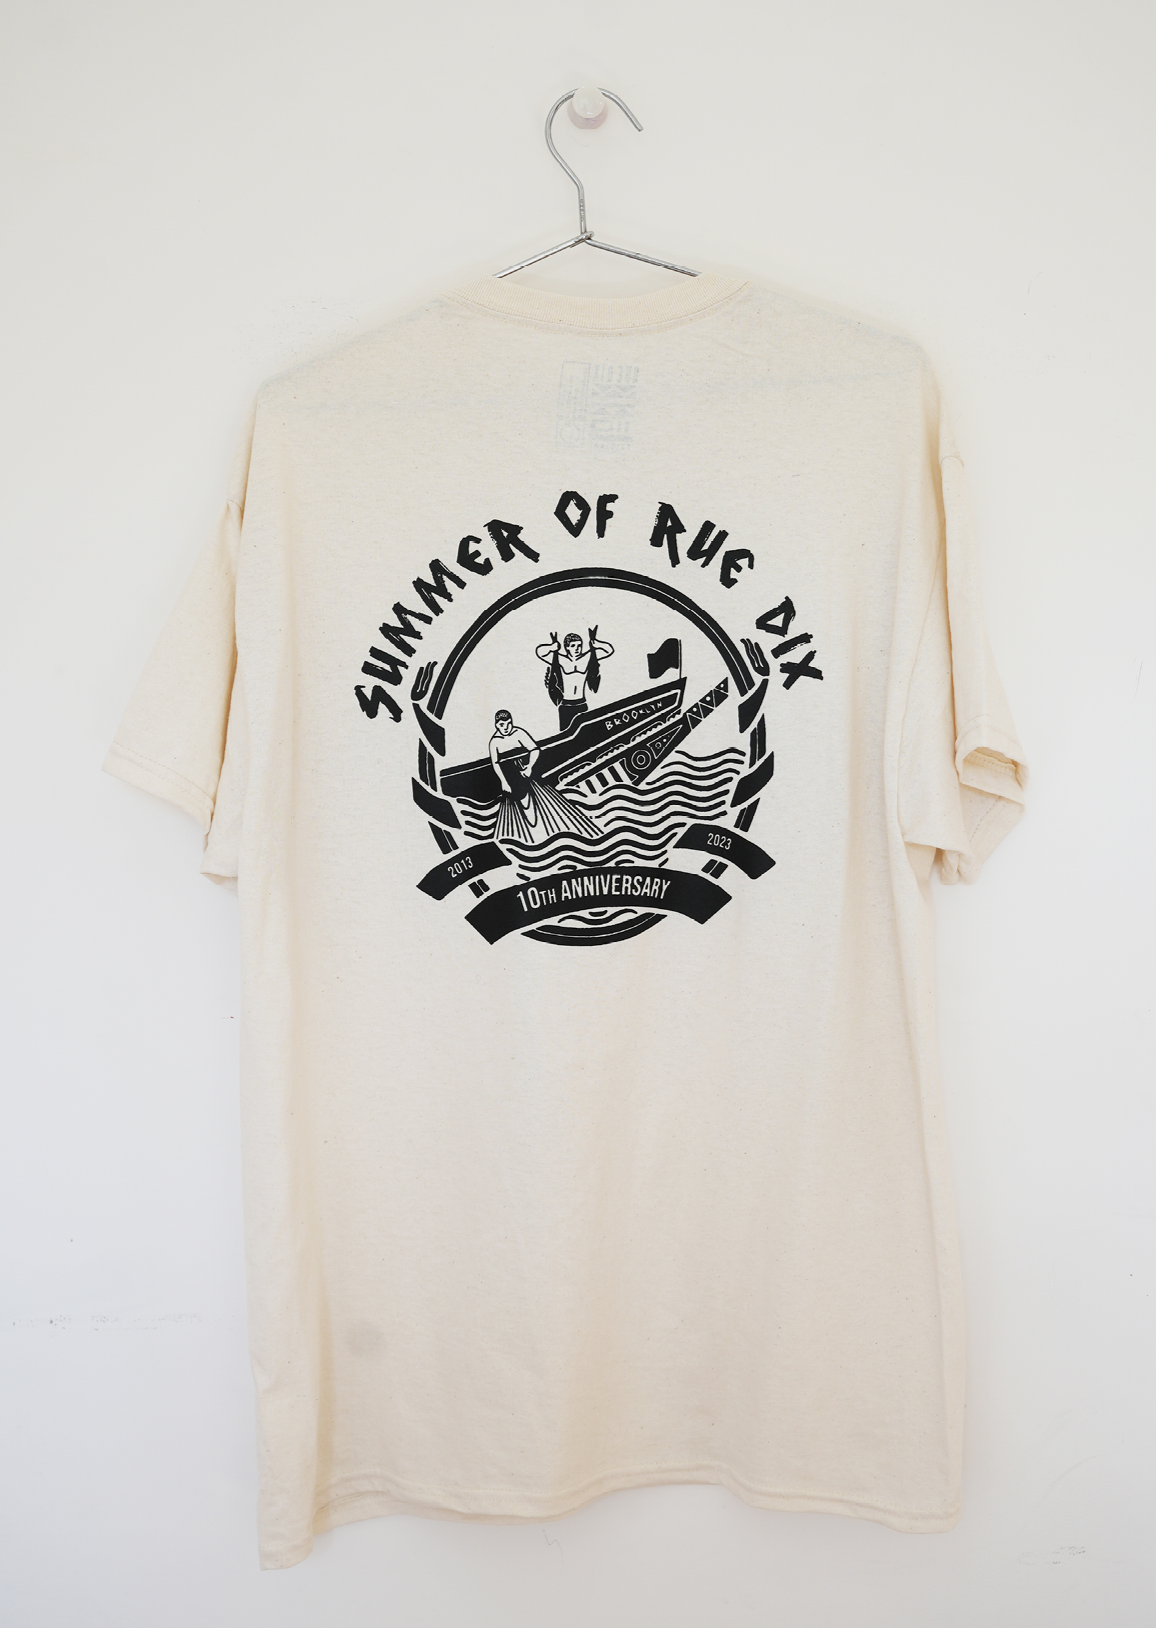 Summer of Rue Dix Limited Edition 10 Year Anniversary T-Shirt